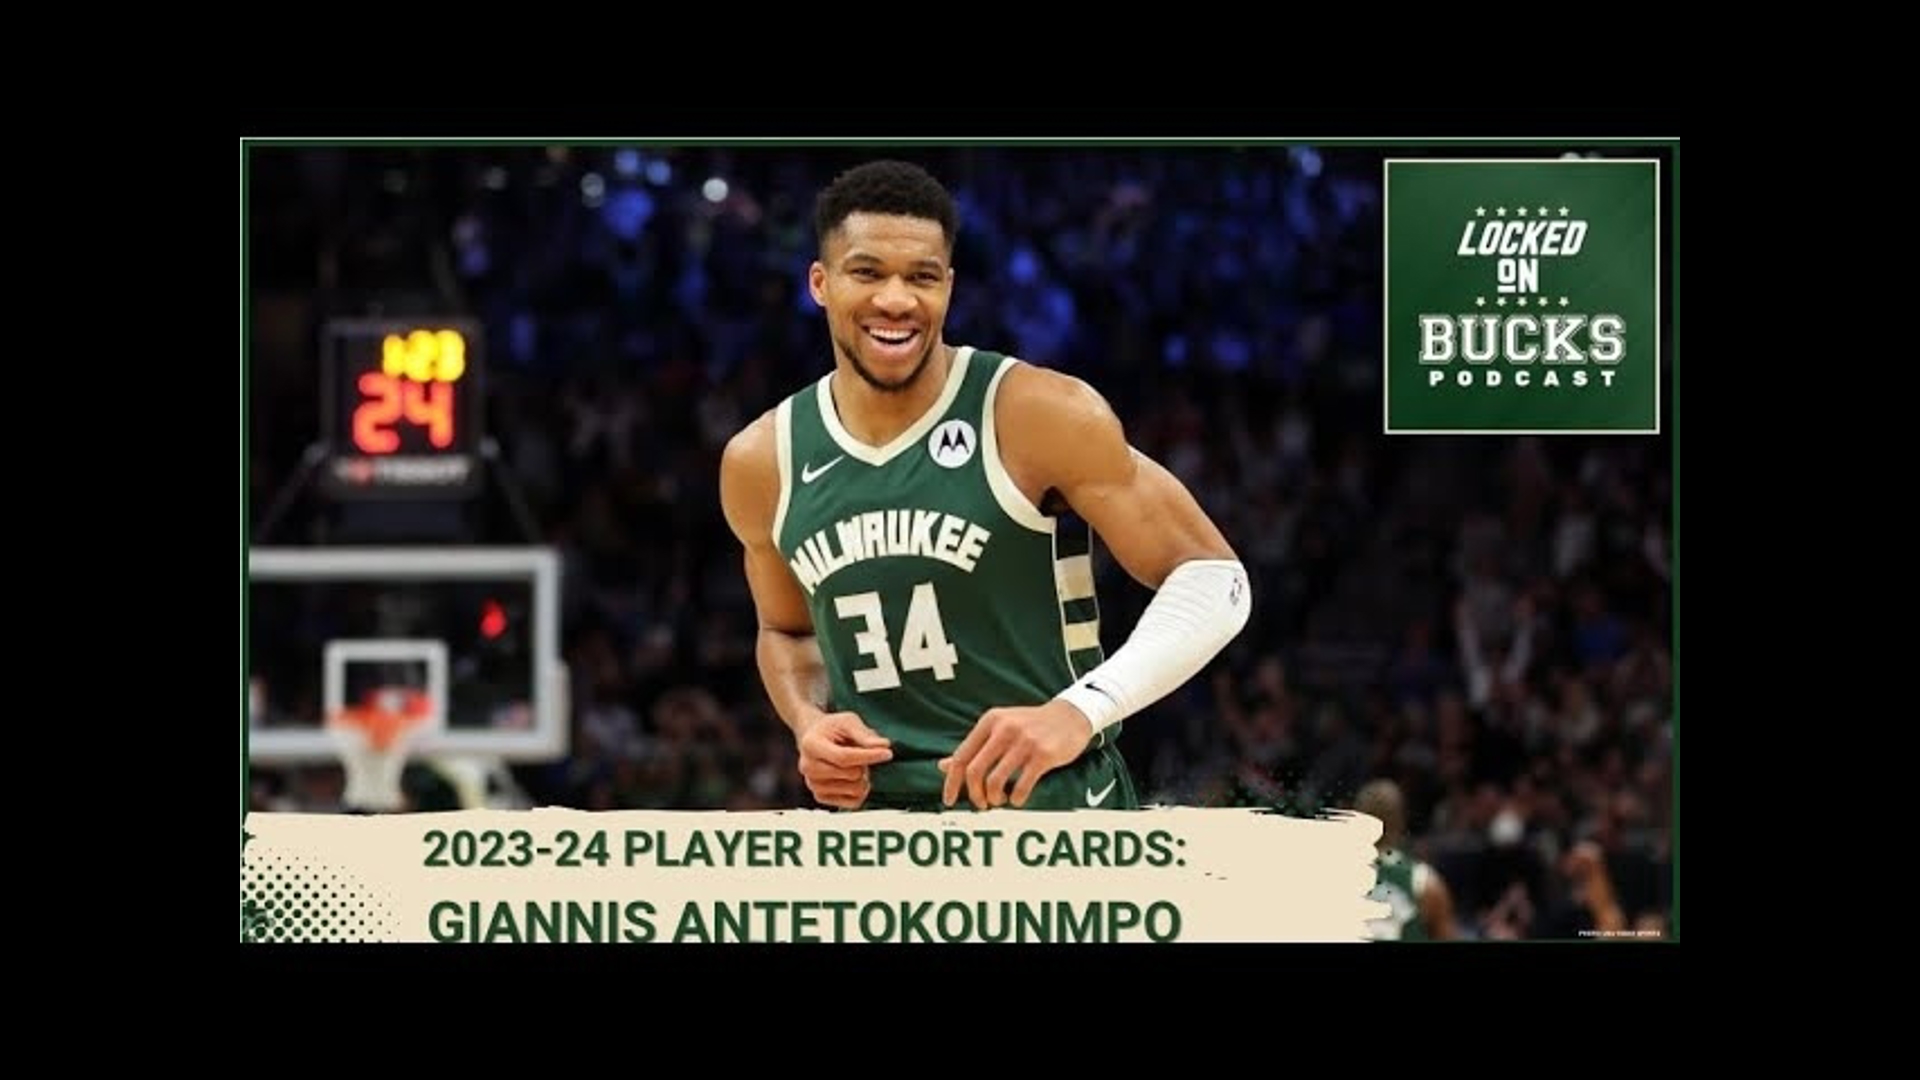 Justin and Camille begin their 2023-24 player reviews with a look back at Giannis Antetokounmpo's season.  His efficiency climbed but did it come at any cost?